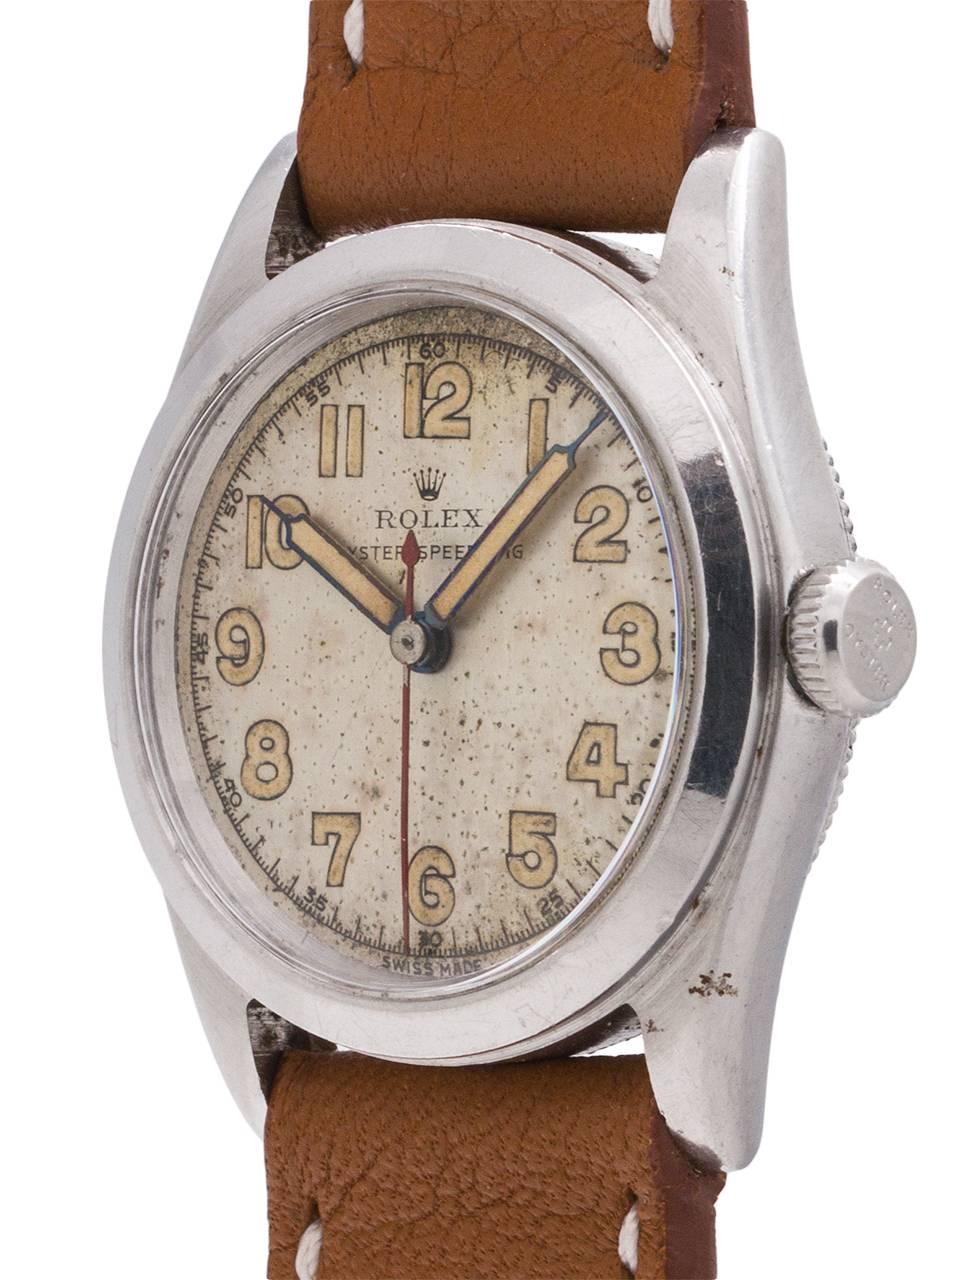 
Rolex Speedking boy’s size 31mm Oyster case circa 1942 with pleasing original matte silvered dial with original patina’d luminous indexes and matching luminous pencil style hands. Powered by 17 jewel manual wind movement with sweep red seconds